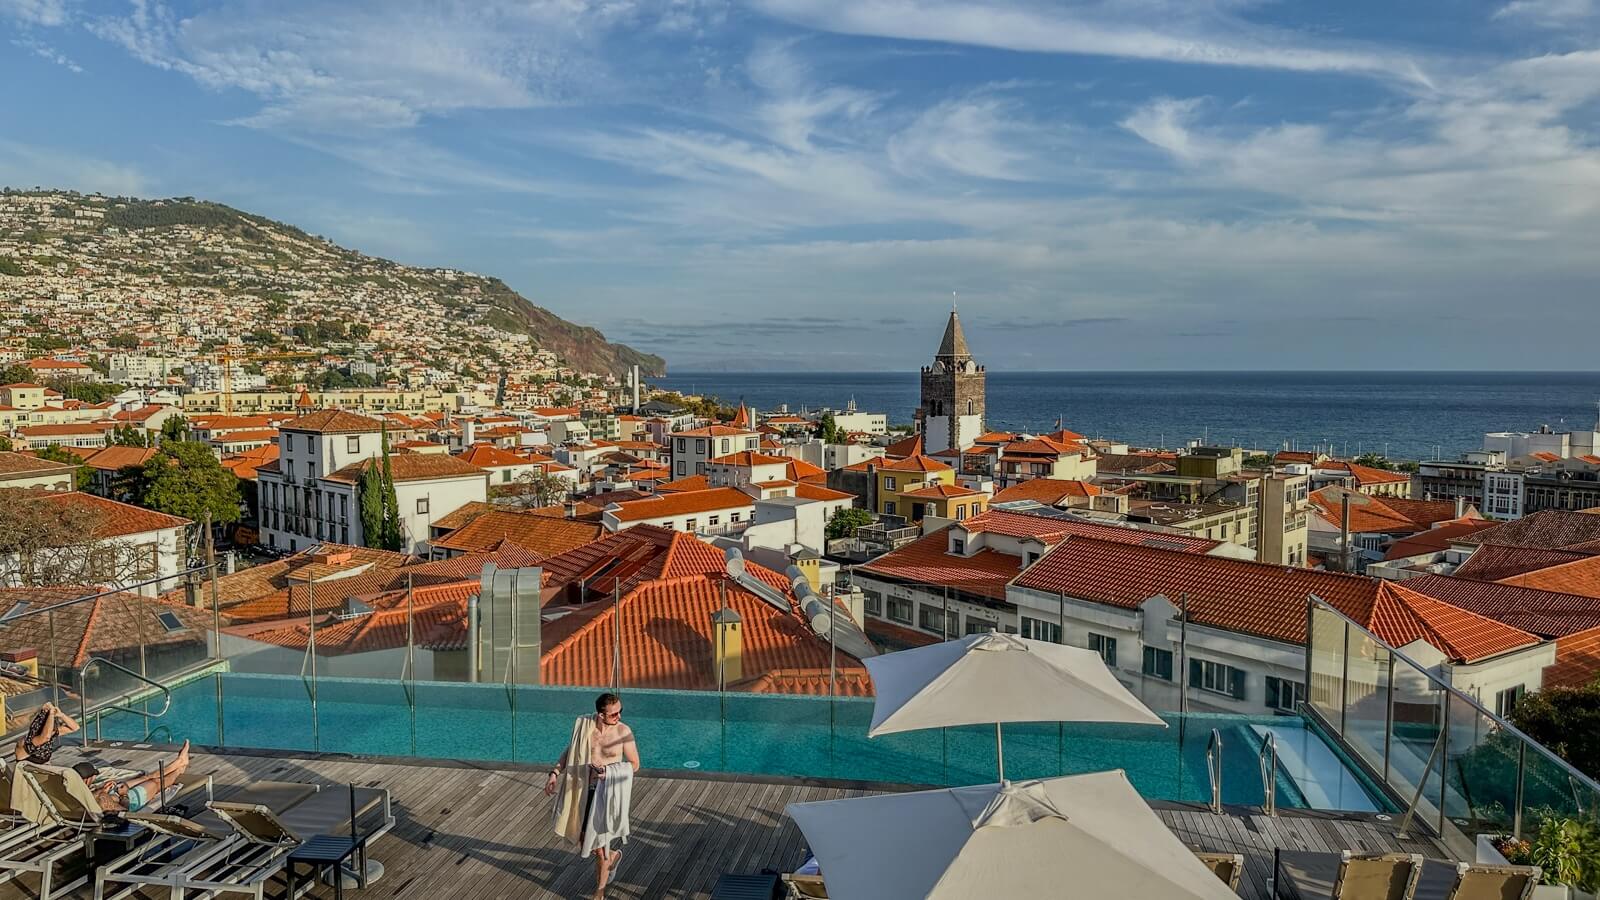 The True Flavours & Natural Beauty of Madeira Islands - Welcome Drink on Rooftop Terrace Bar in Funchal